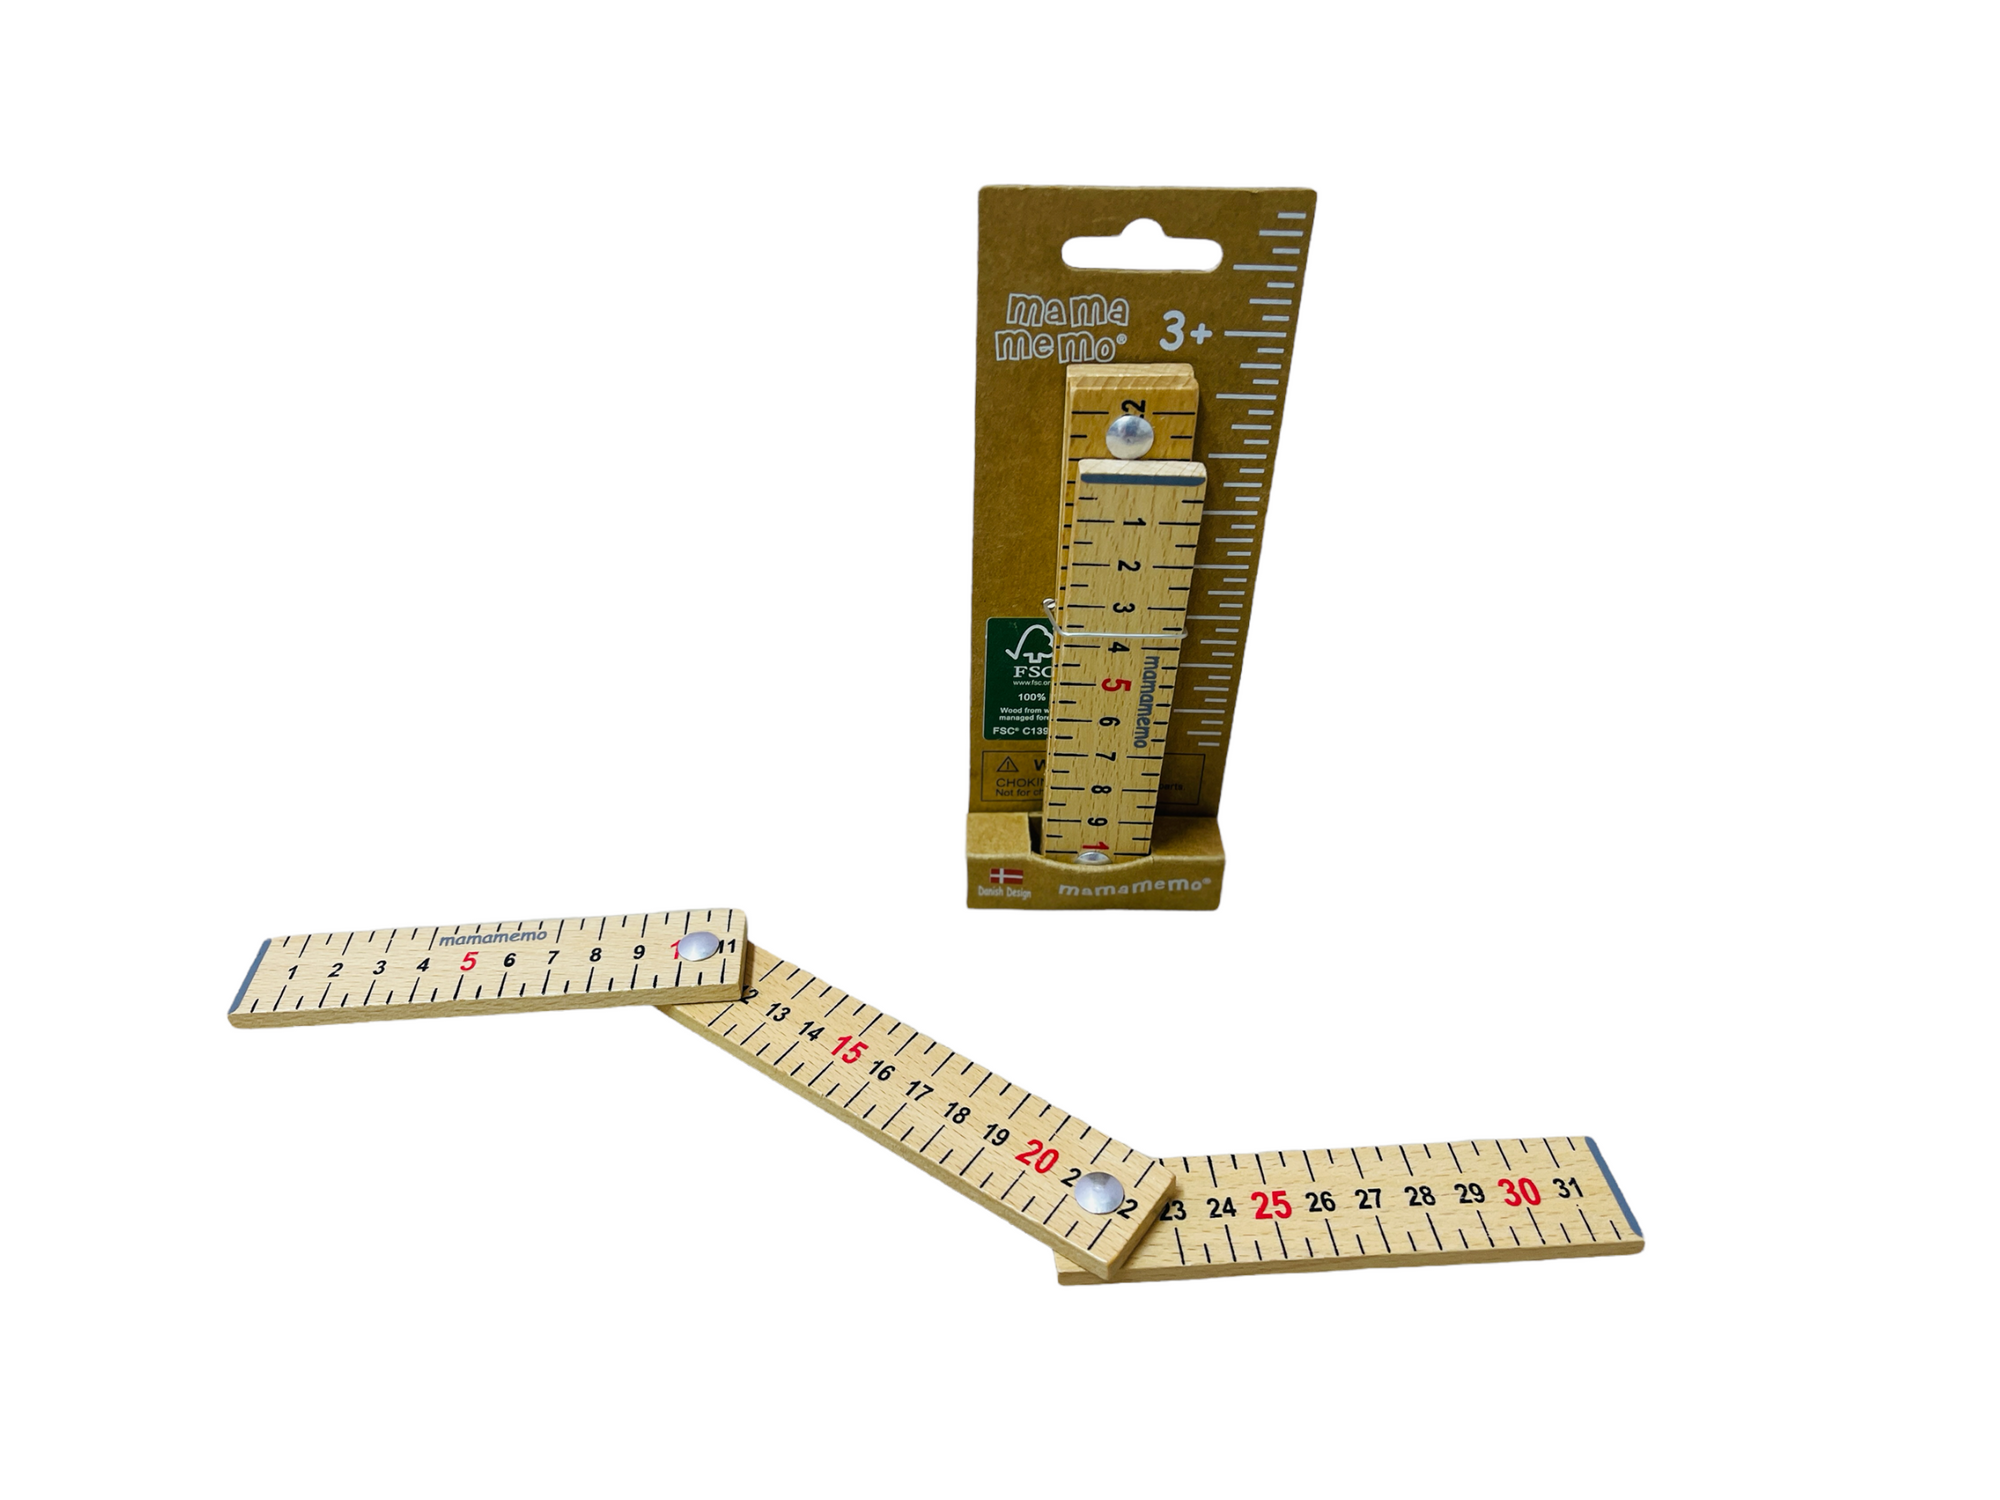 MamaMemo Folding Ruler on display with the ruler in front of it's package